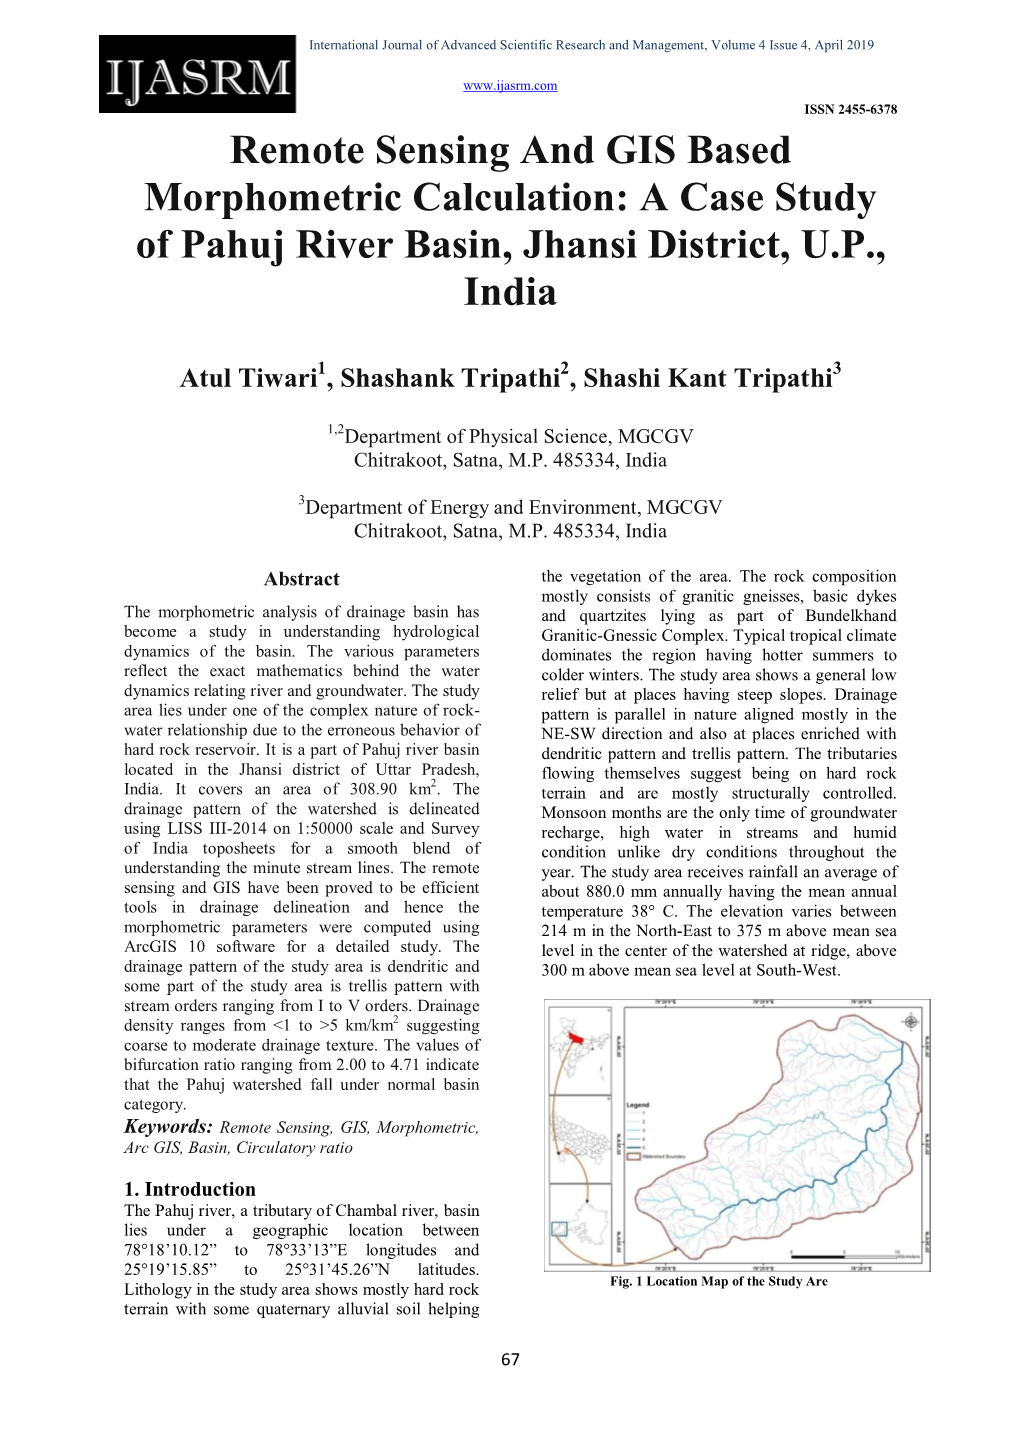 A Case Study of Pahuj River Basin, Jhansi District, UP, India